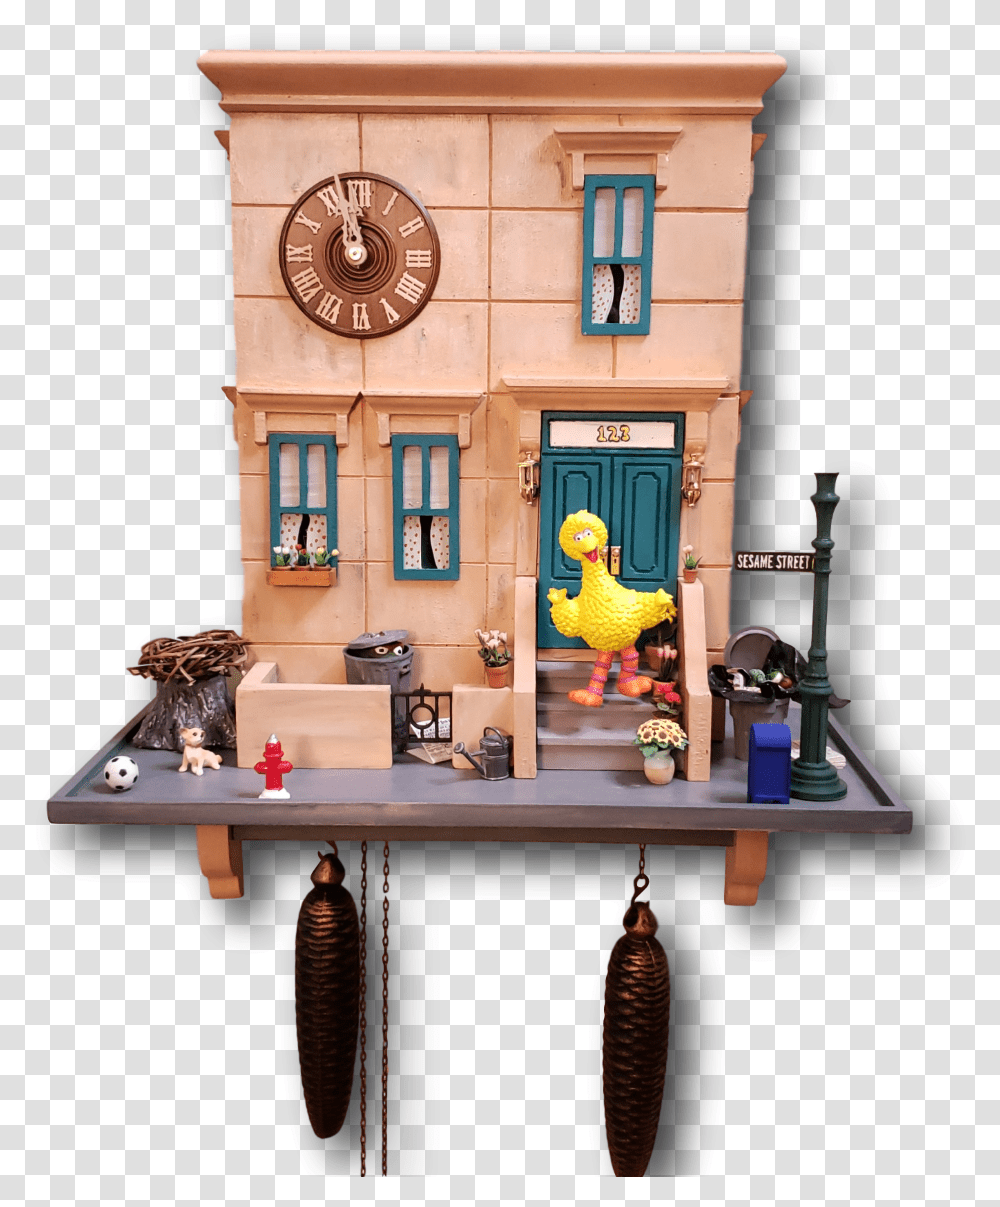 Voice Of Big Bird And Oscar Gifted With Special Clock By Sesame Street Cuckoo Clock, Tabletop, Furniture, Wood, Analog Clock Transparent Png